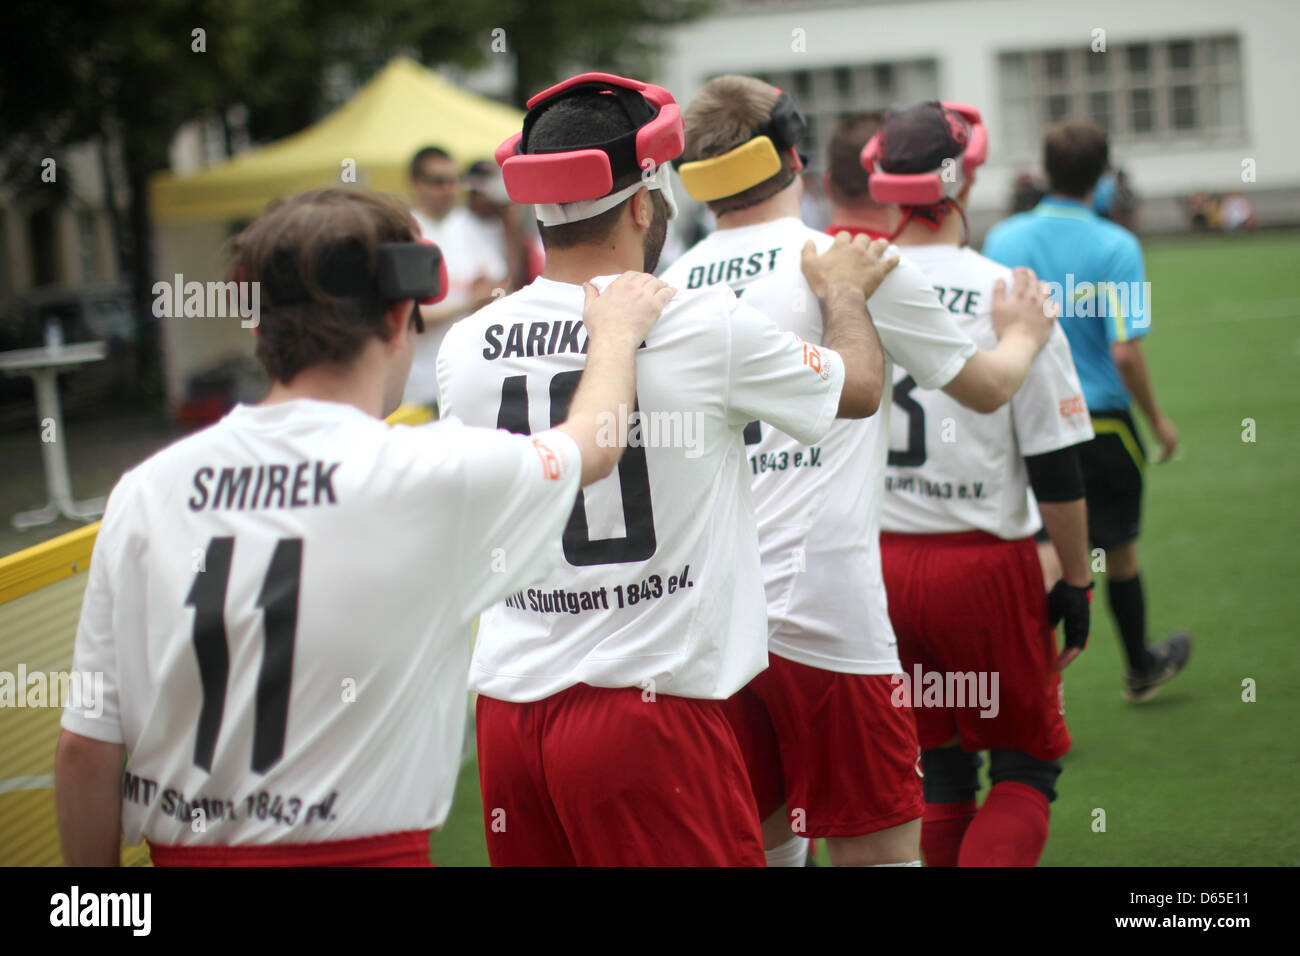 The players of MTV Stuttgart walk onto the pitch for a Blind Bundesliga match at Universitaetsplatz in Heidelberg, Germany, 16 June 2012. In the Blind Bundesliga, the blind players wear protective headgear and chase after a ball with rattles, led by their sense of hearing. Photo: Fredrik von Erichsen Stock Photo